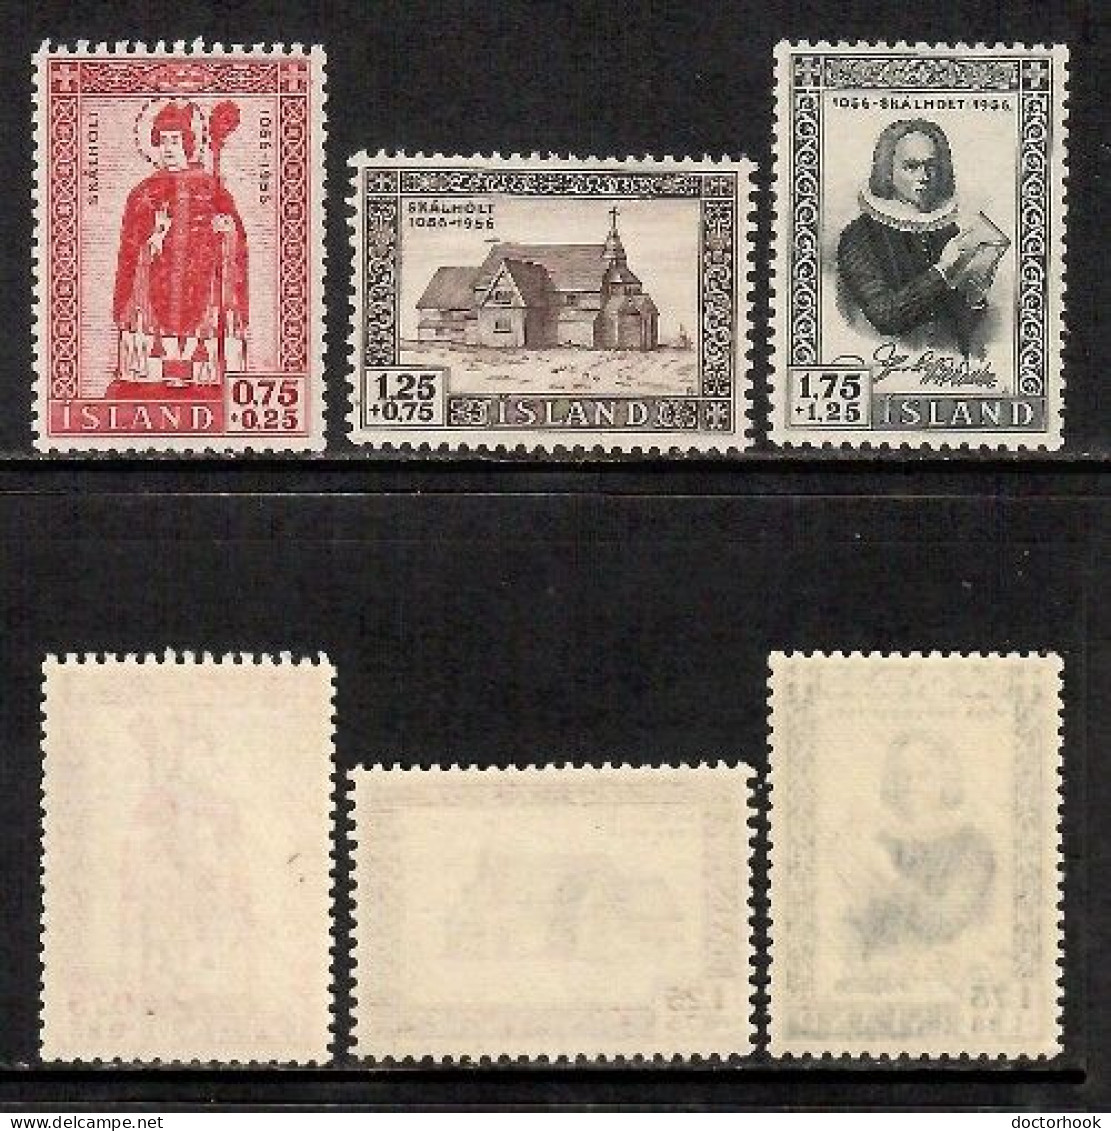 ICELAND   Scott # B 14-6** MINT NH (CONDITION AS PER SCAN) (Stamp Scan # 996-9) - Nuovi